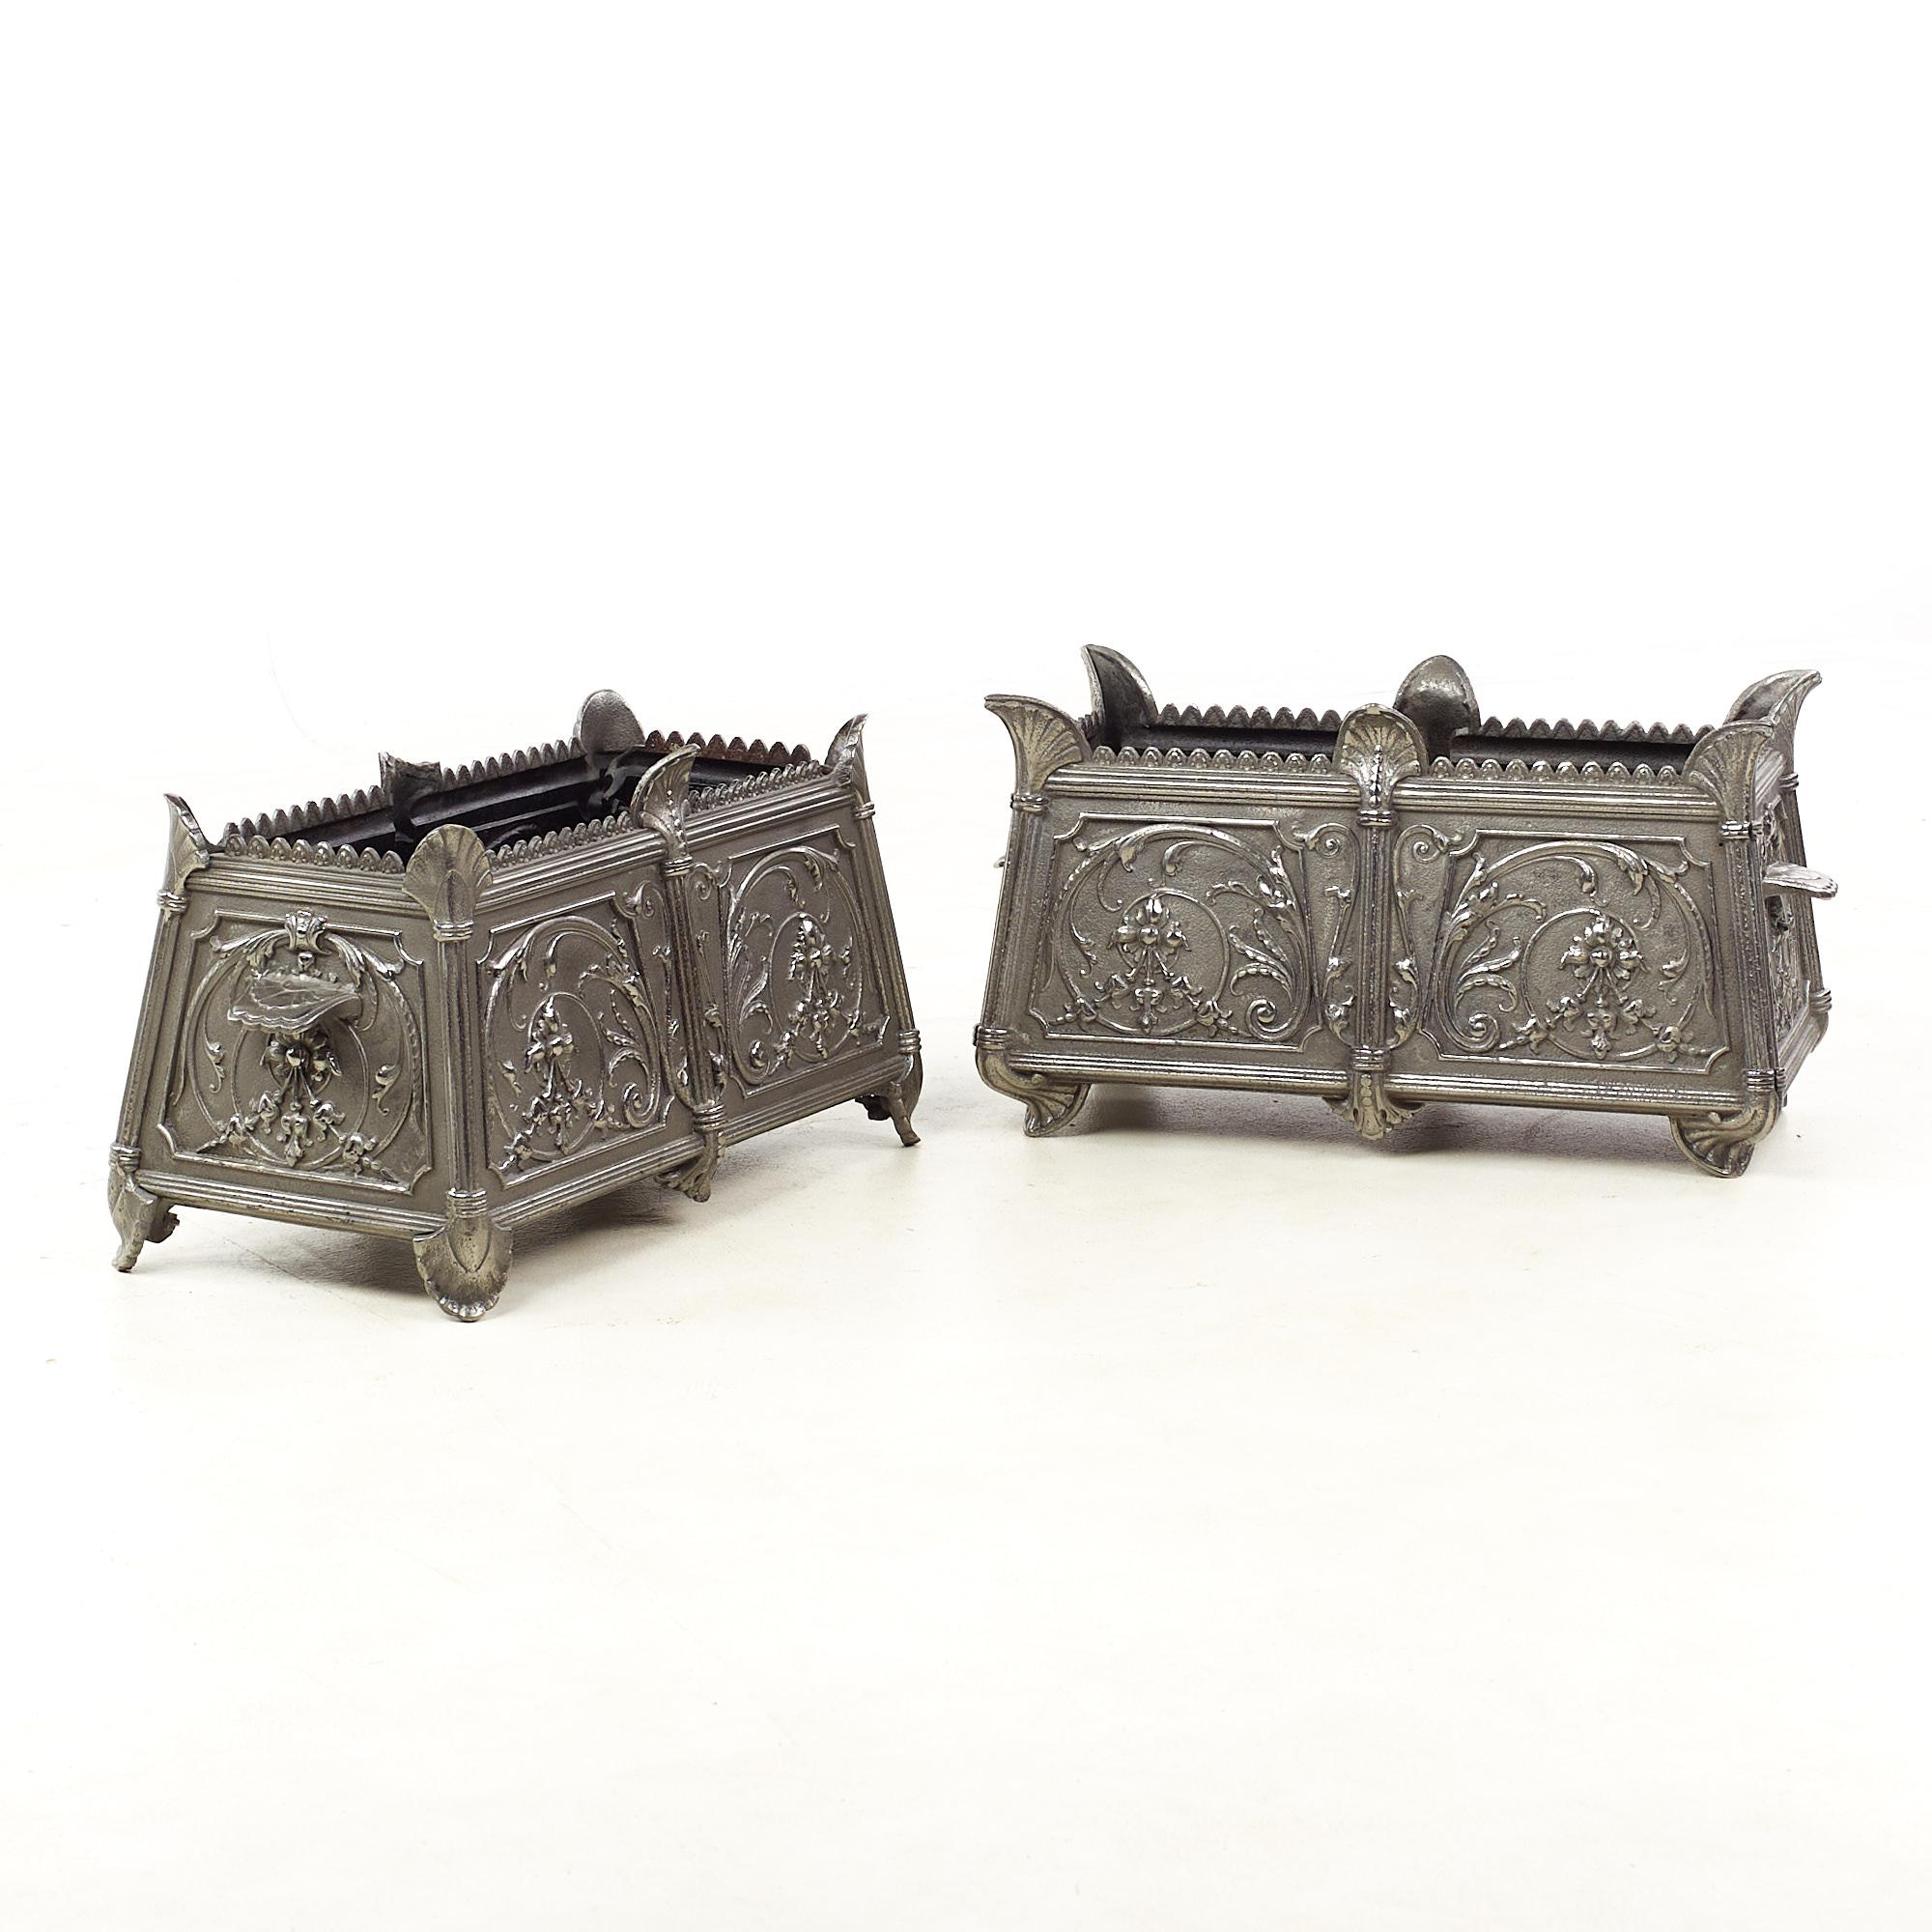 Louis Philippe French Ornate Cast Iron Planter Boxes - Pair

Each planter measures: 22 wide x 11 deep x 11 inches high 

This pair is in Good Vintage Condition with some rust and metal chips inside; a leaf is broken off on one planter.

We take our